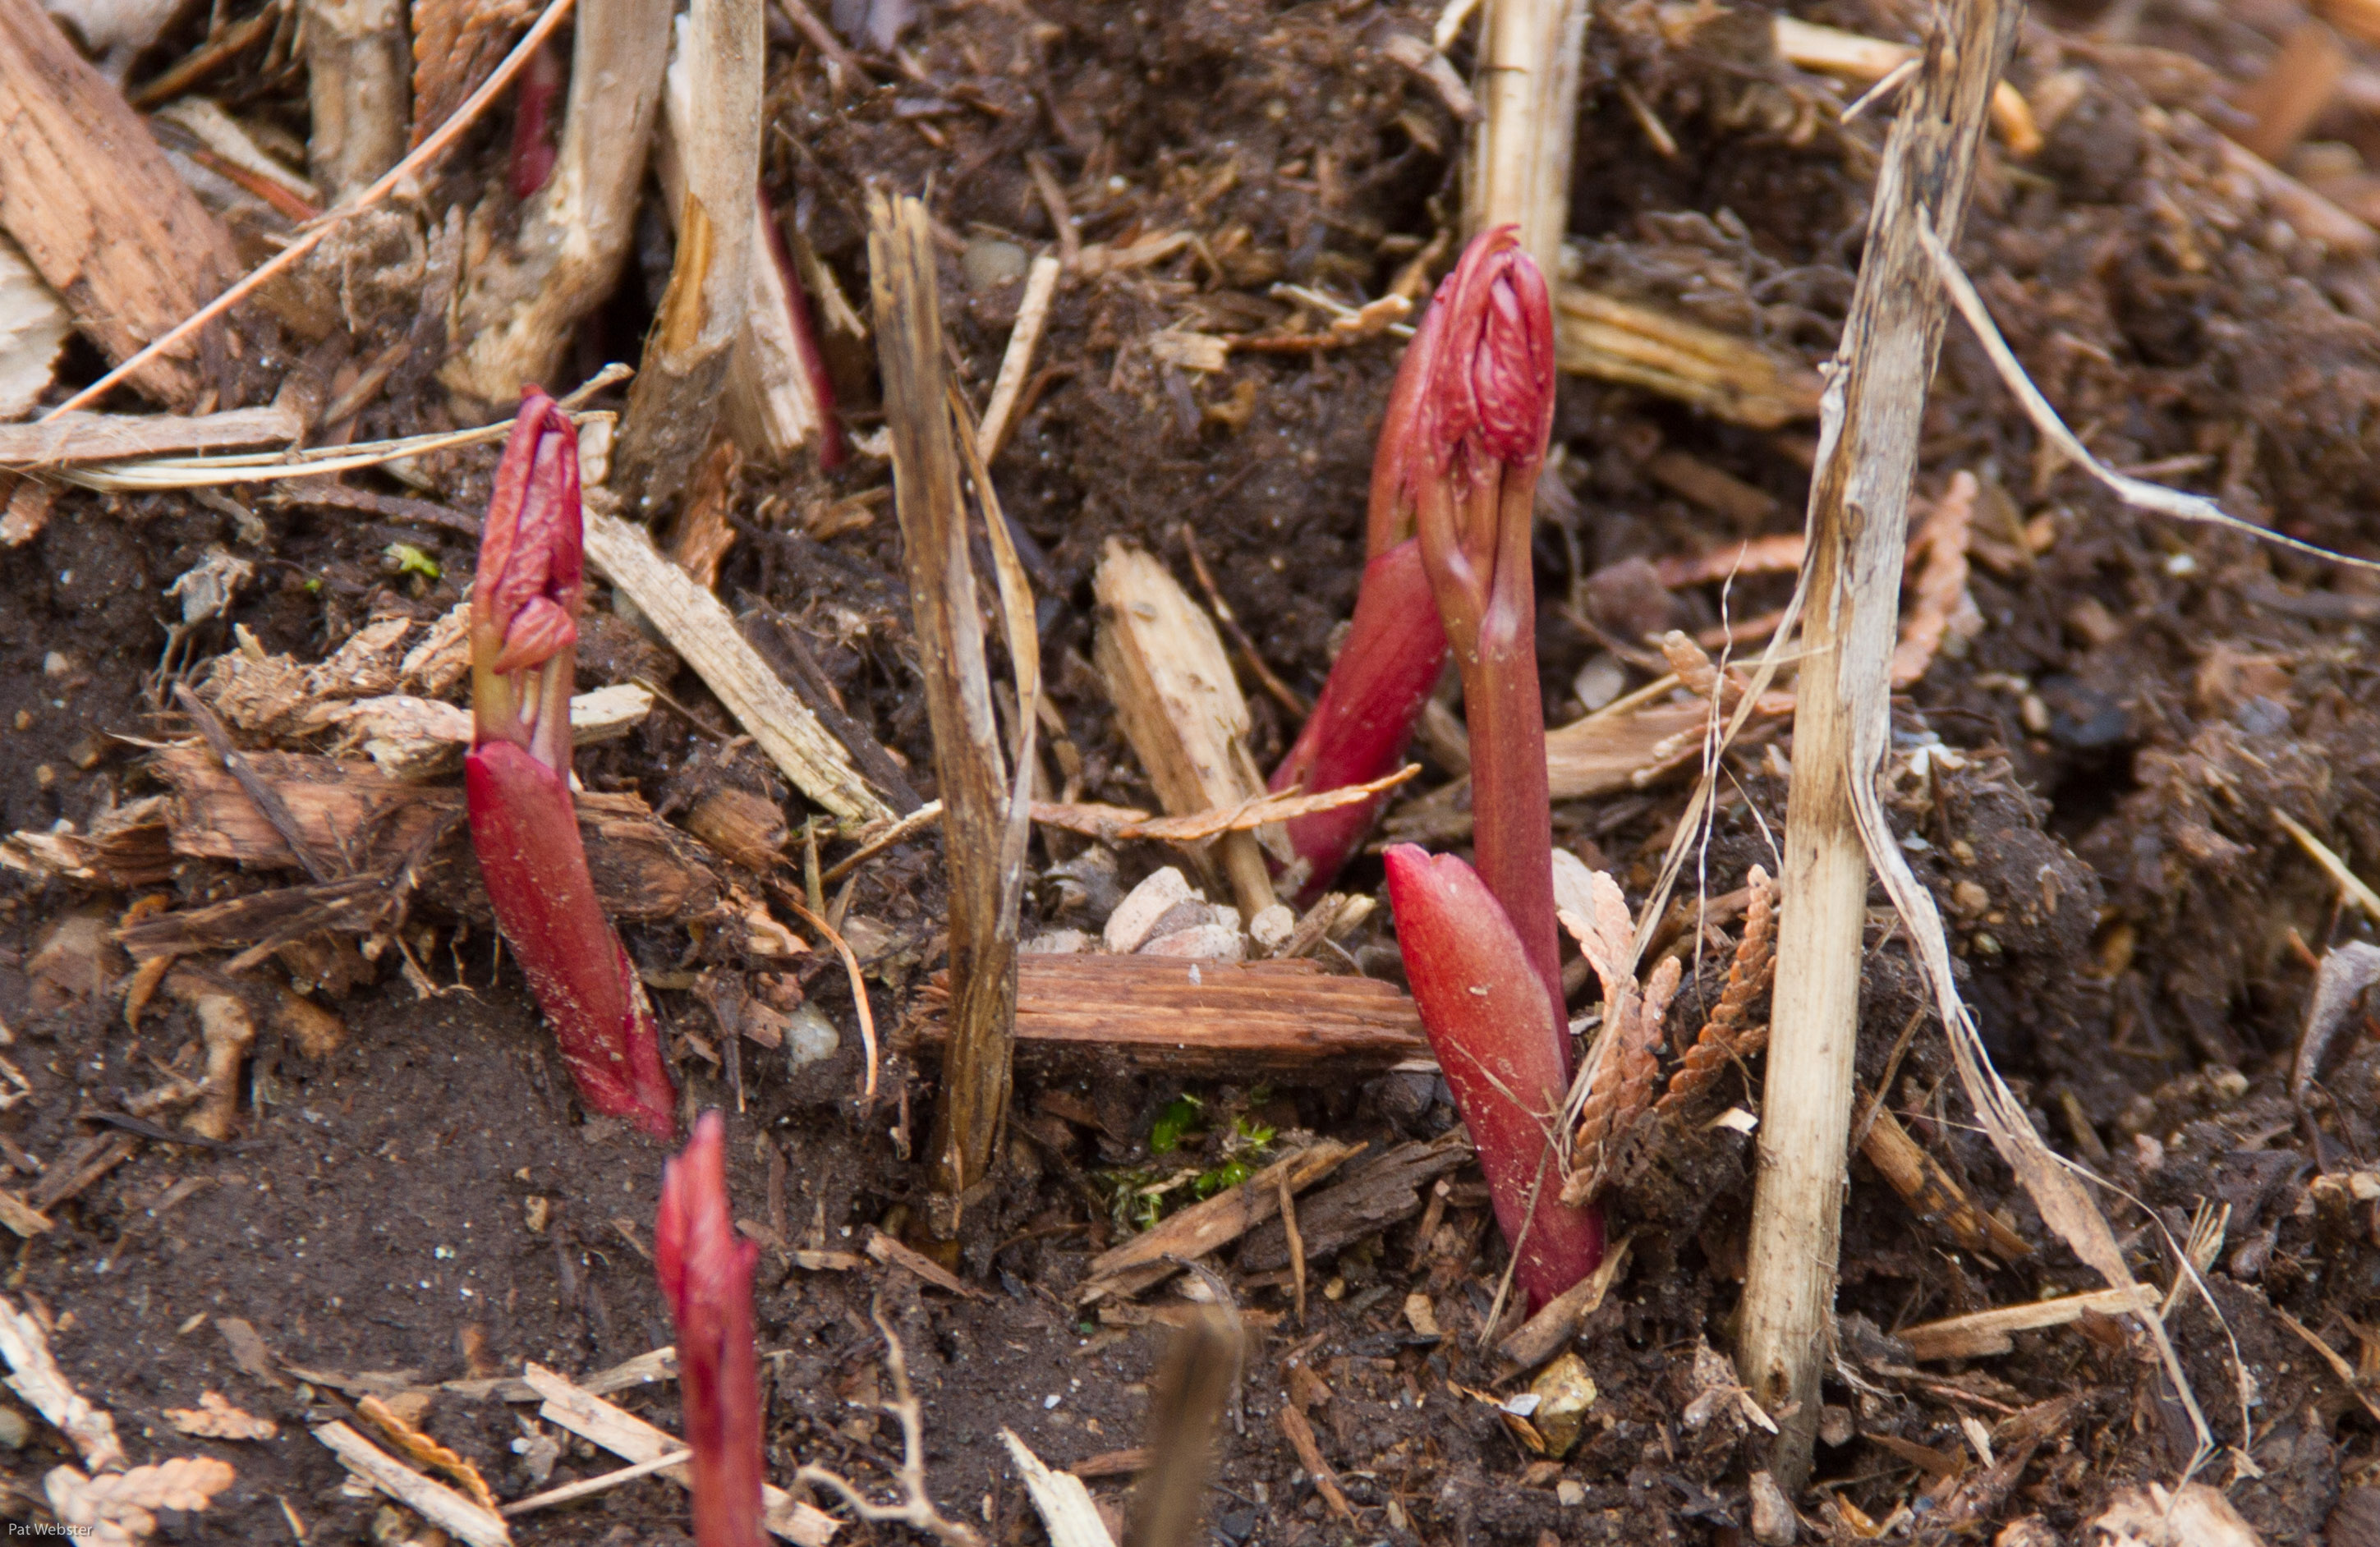 Peony shoots just emerging are a gorgeous shade of red.